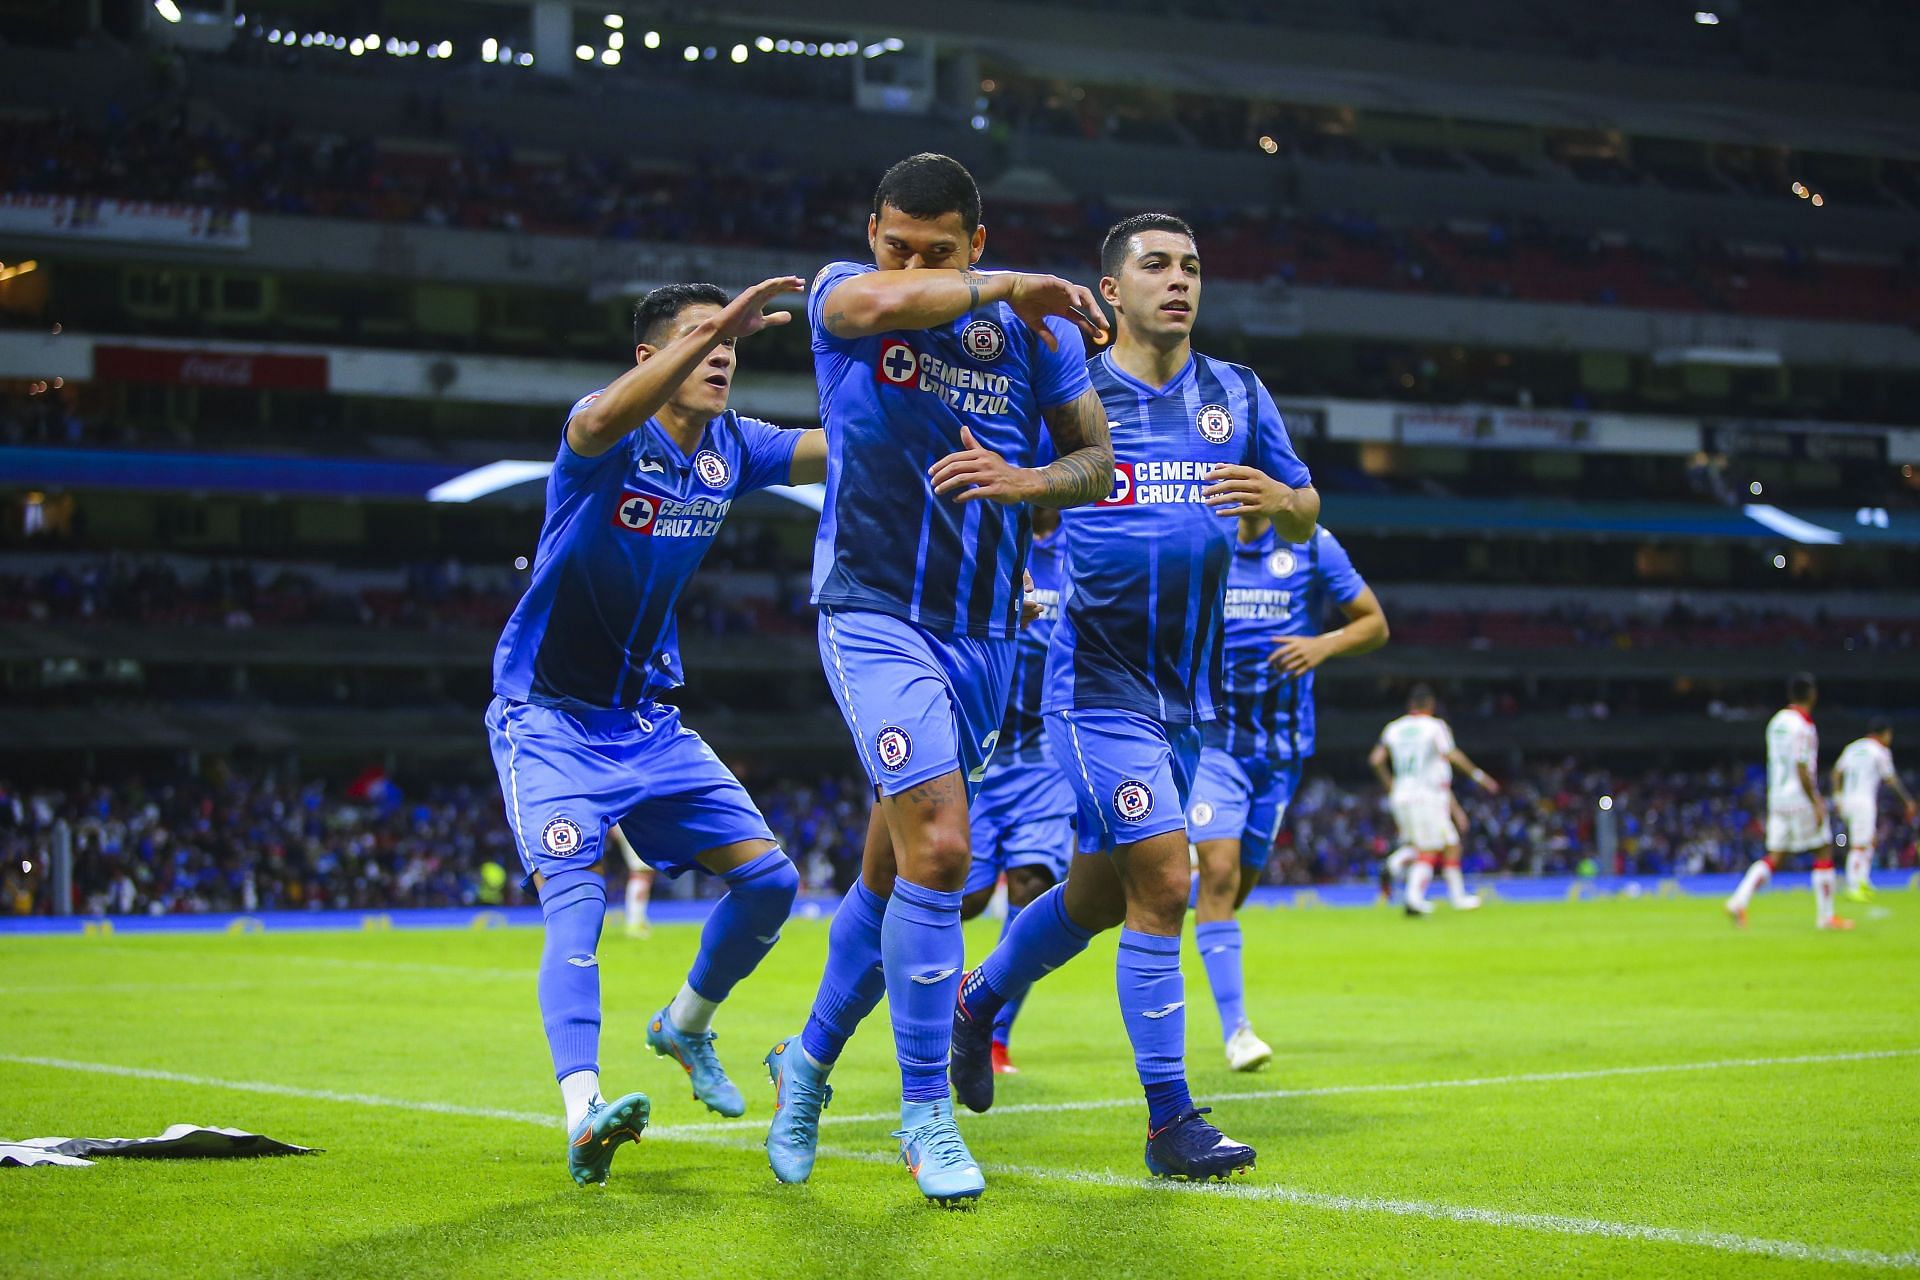 Cruz Azul host Montreal in their upcoming CONCACAF Champions League fixture on Wednesday